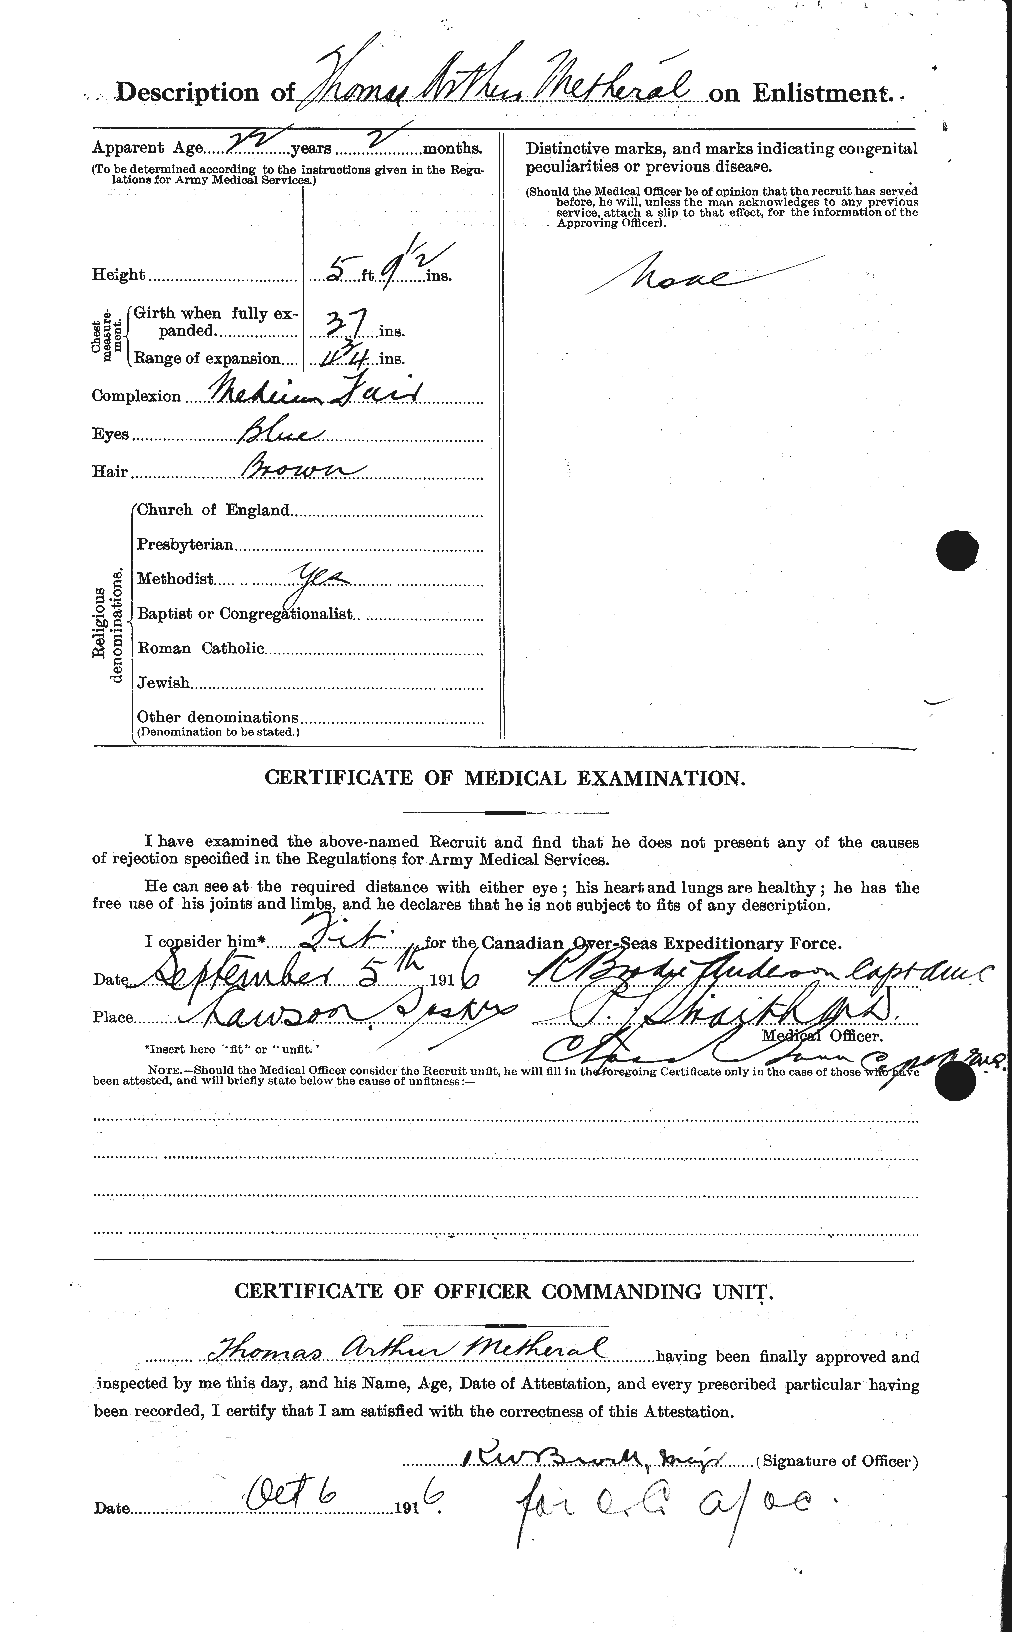 Personnel Records of the First World War - CEF 492809b